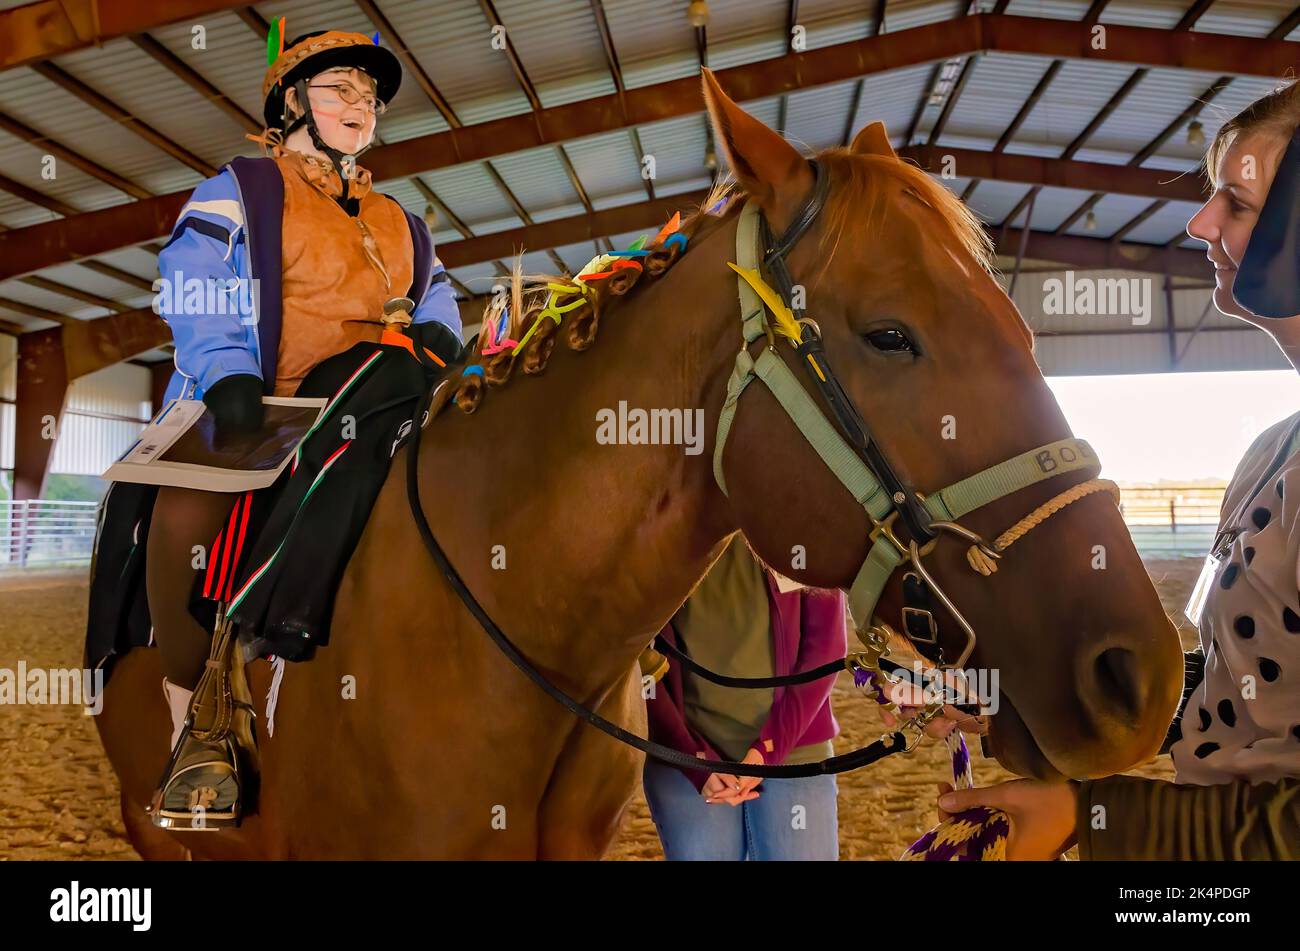 A child rides a therapy horse at a Halloween costume party for riders in the Therapeutic Equestrian program, Oct. 29, 2012, in West Point, Mississippi. Stock Photo